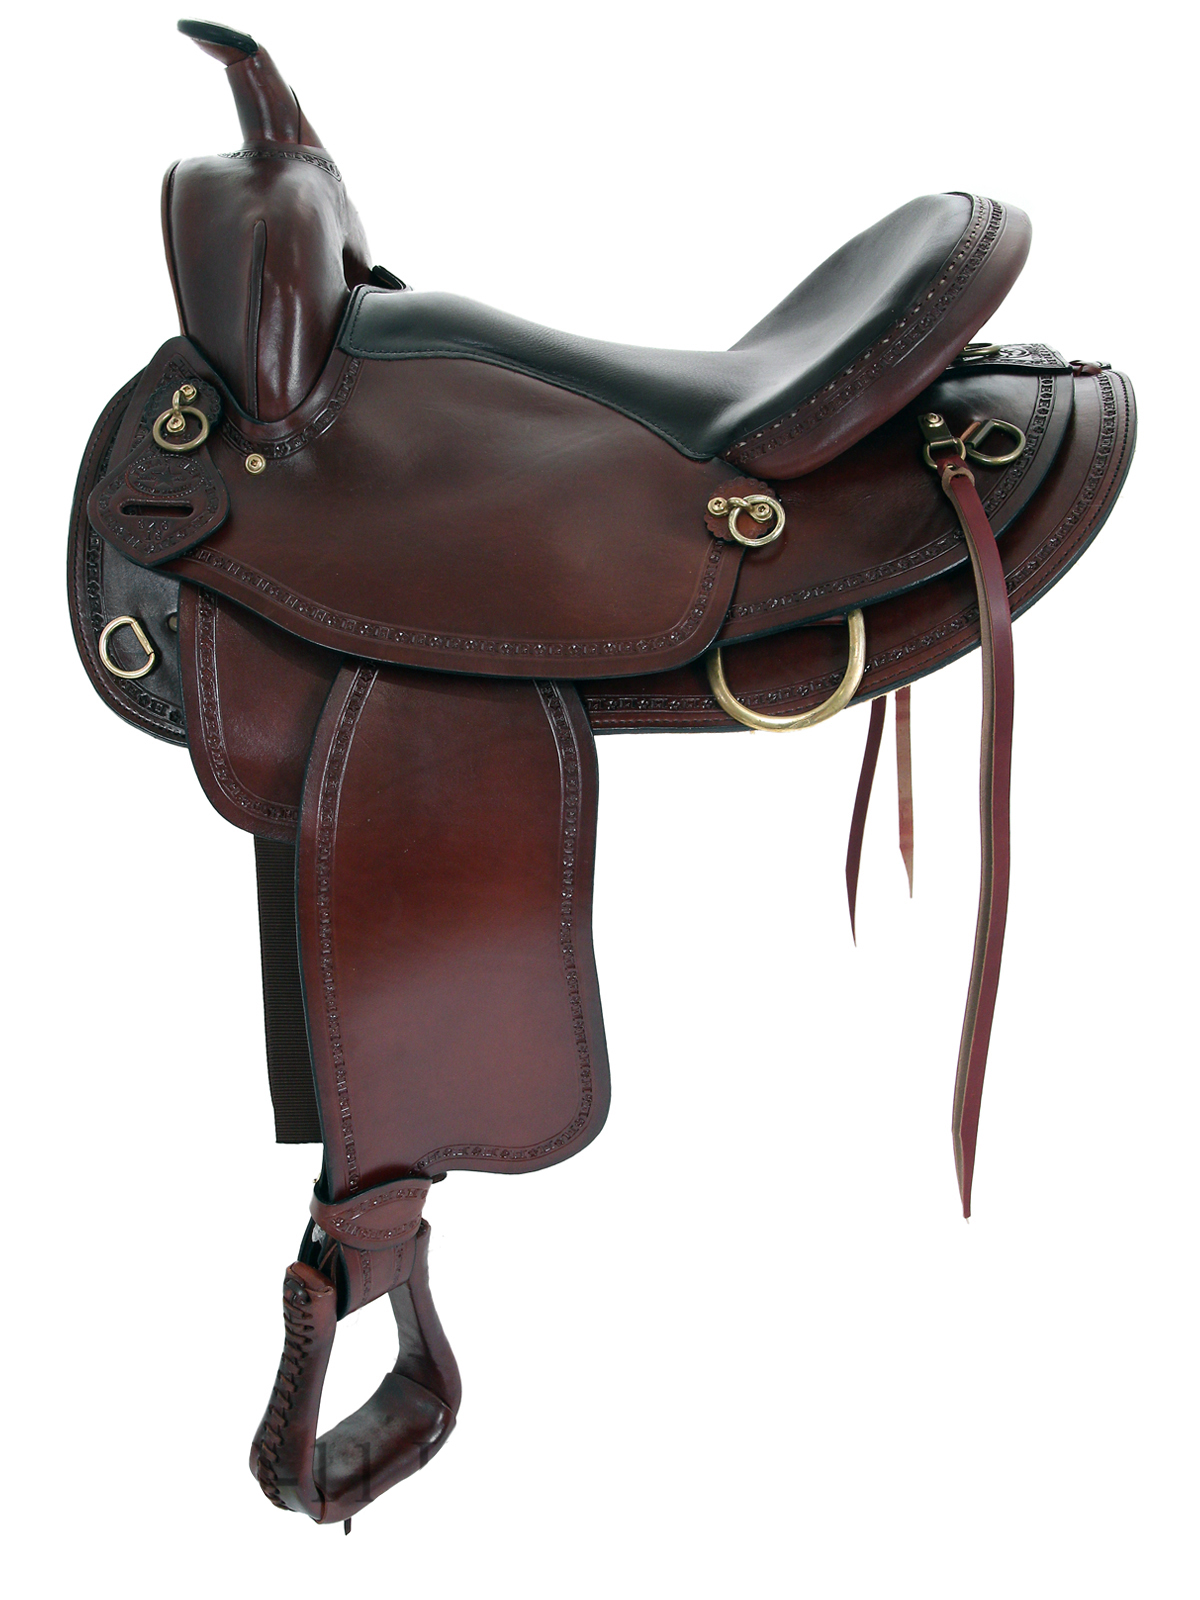 16inch 17inch Big Horn Texas Best Hill Country Trail II Saddle 940F